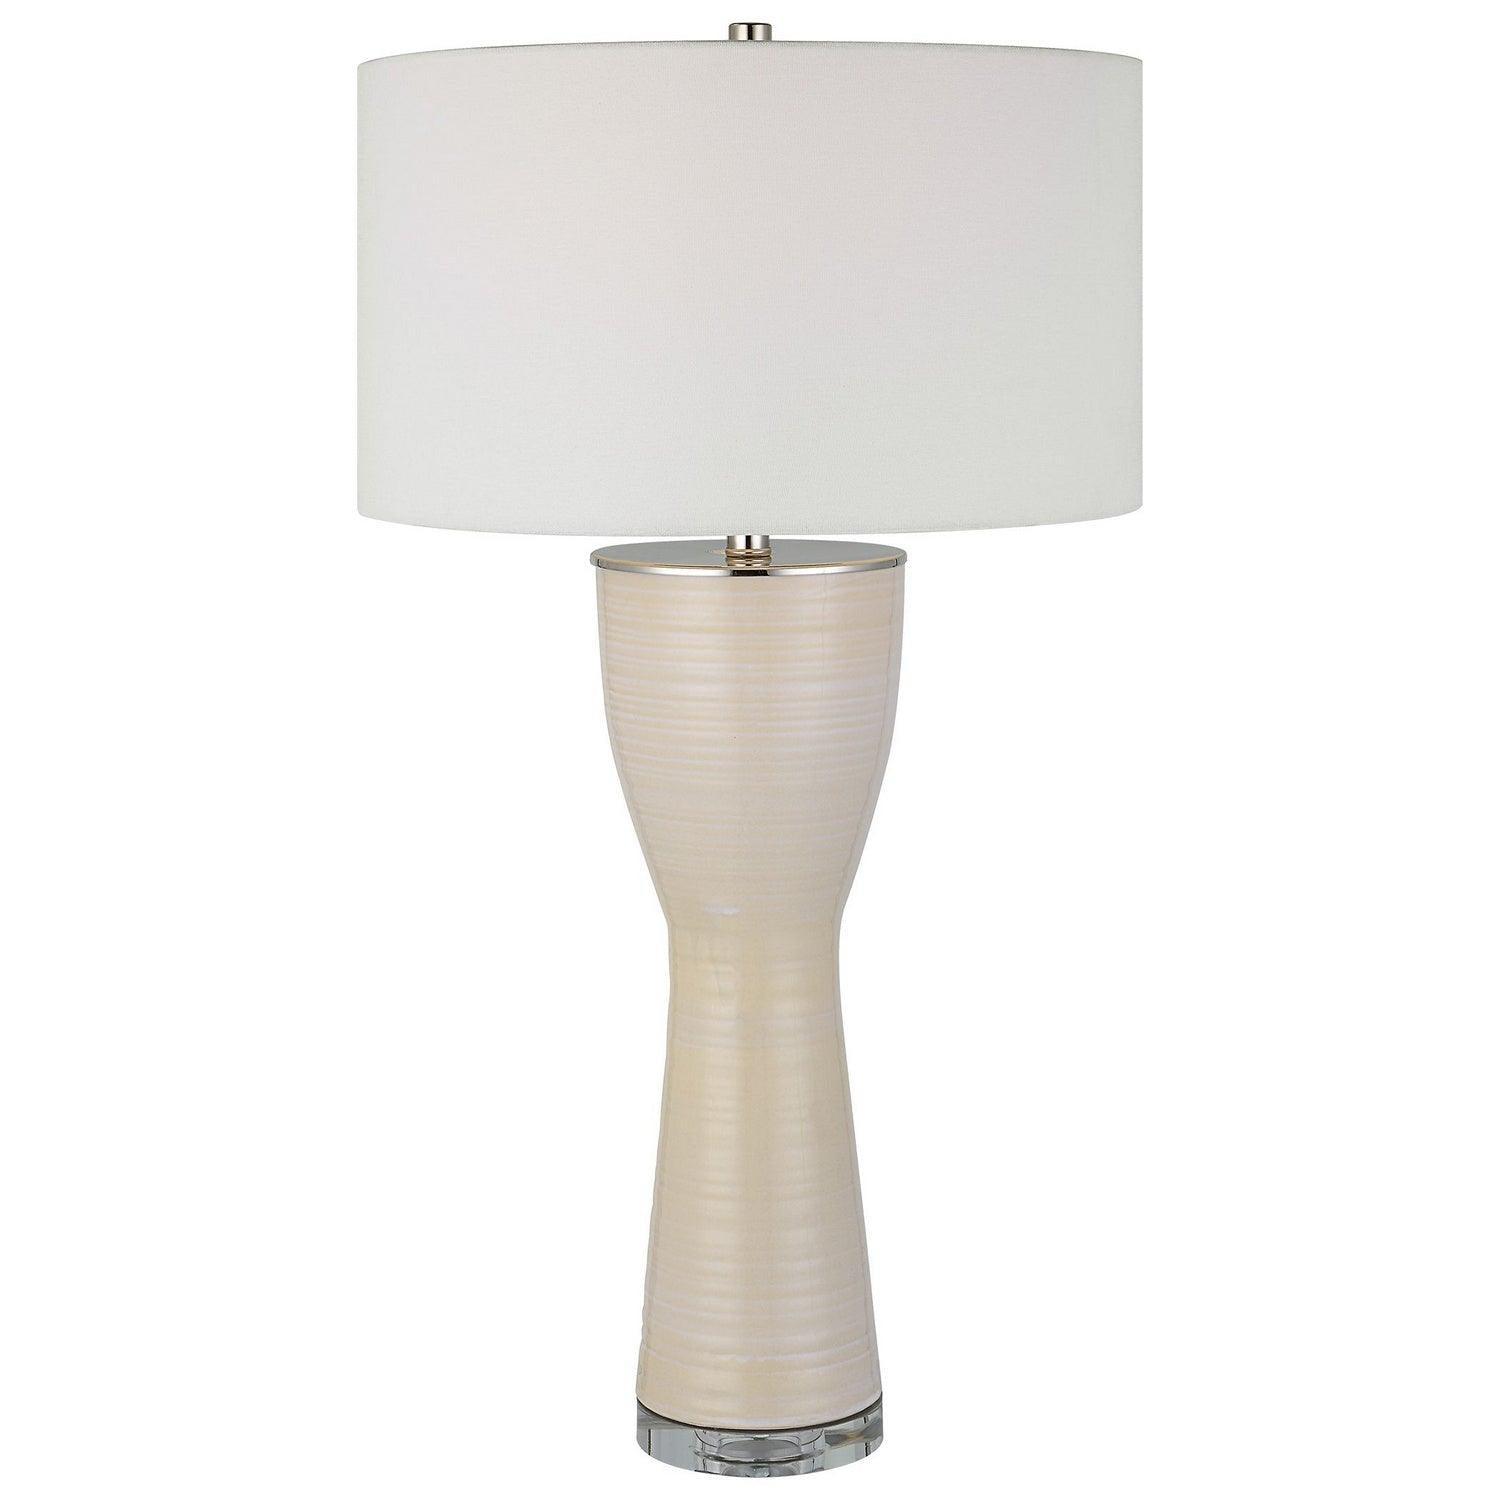 The Uttermost - Amphora Table Lamp - 30001-1 | Montreal Lighting & Hardware